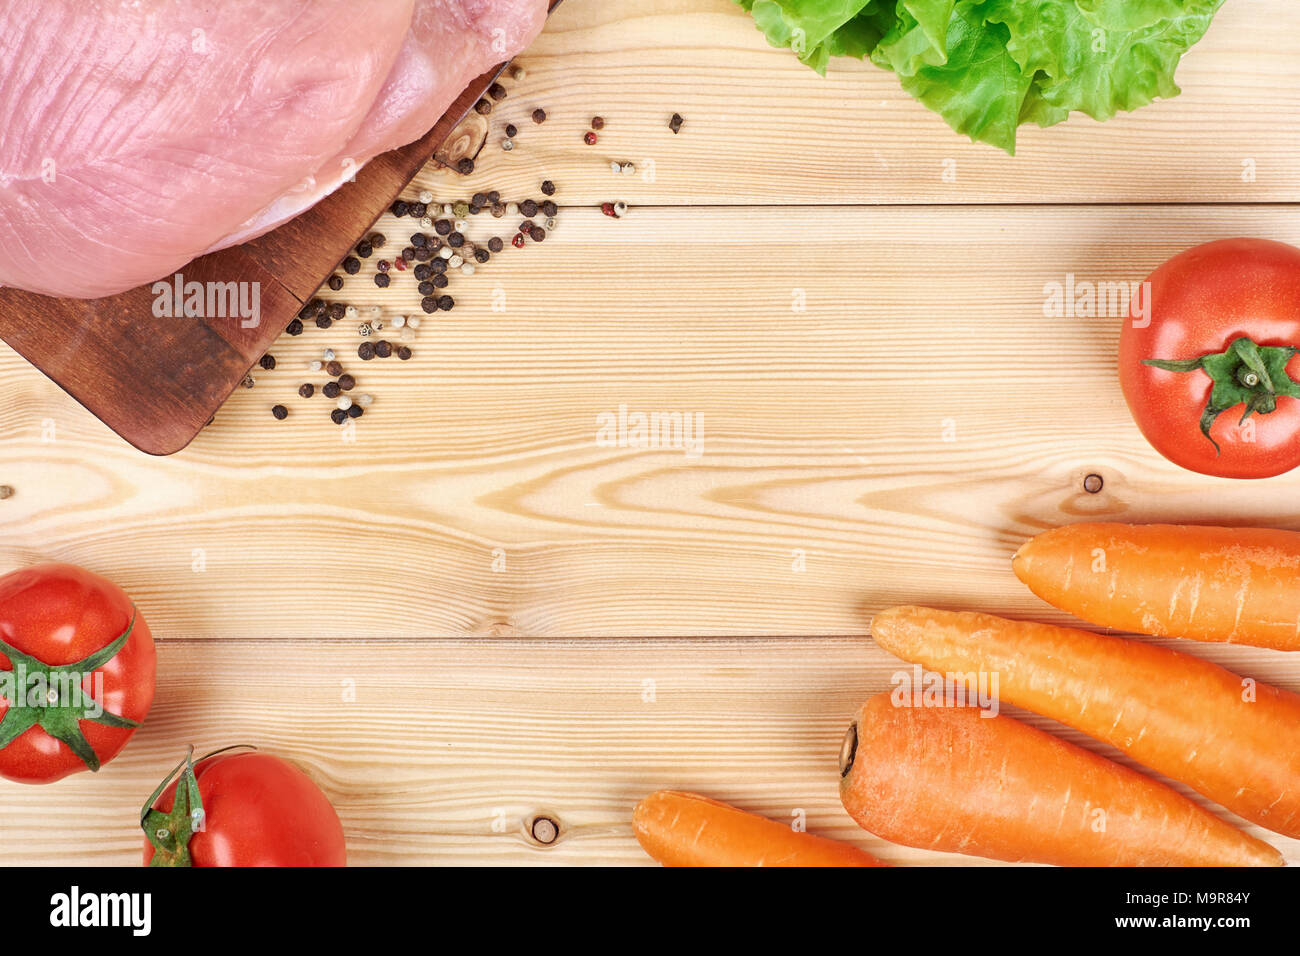 Download Frame Of Fresh Vegetables And Dietary Meat On Wooden Background Healthy Natural Food On Table With Copy Space Cooking Ingredients Top View Mockup For Recipe Or Menu Stock Photo Alamy